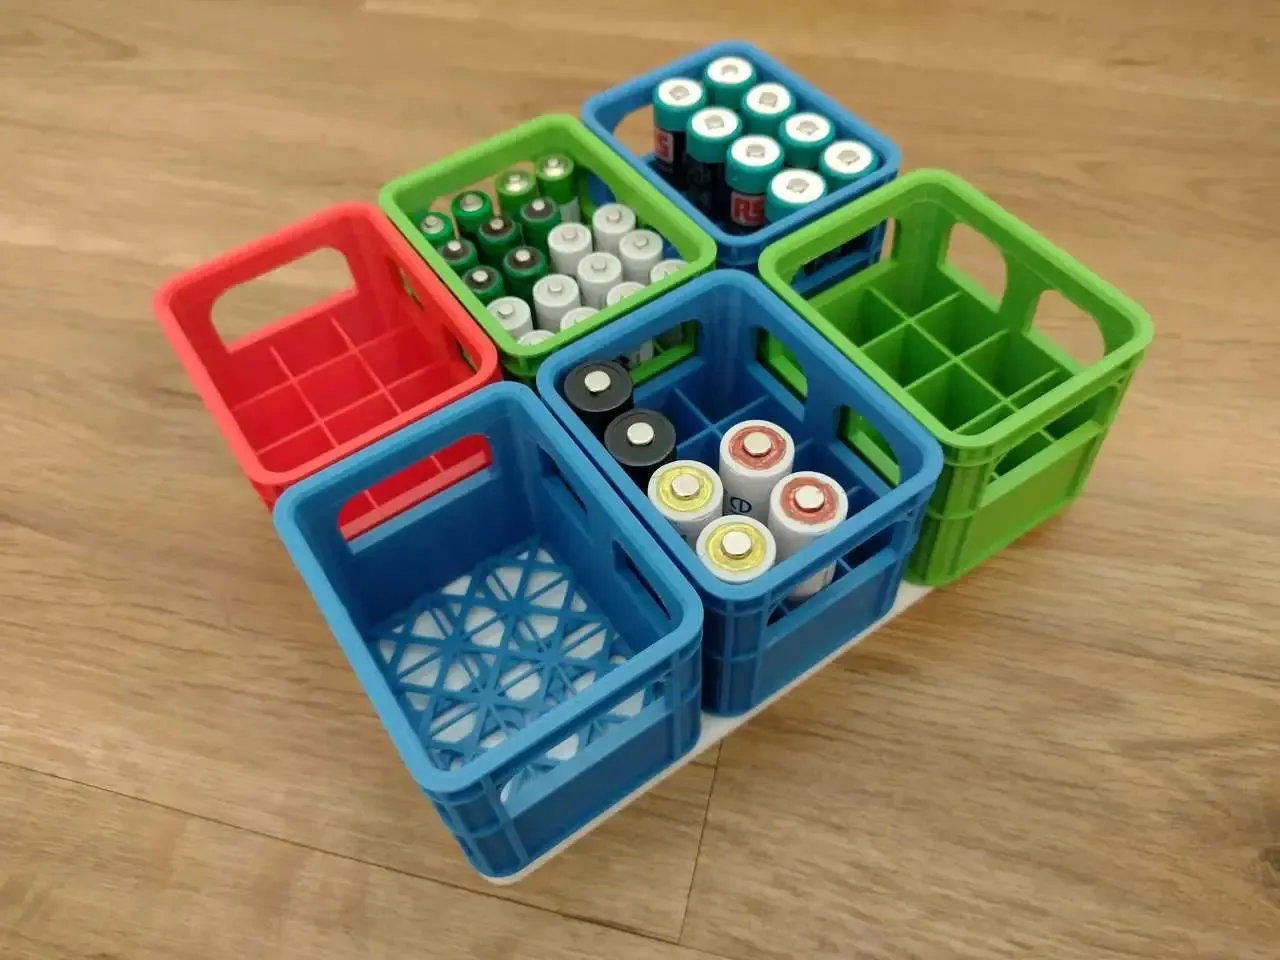 Customizable & stackable beer crate for all types of batteri